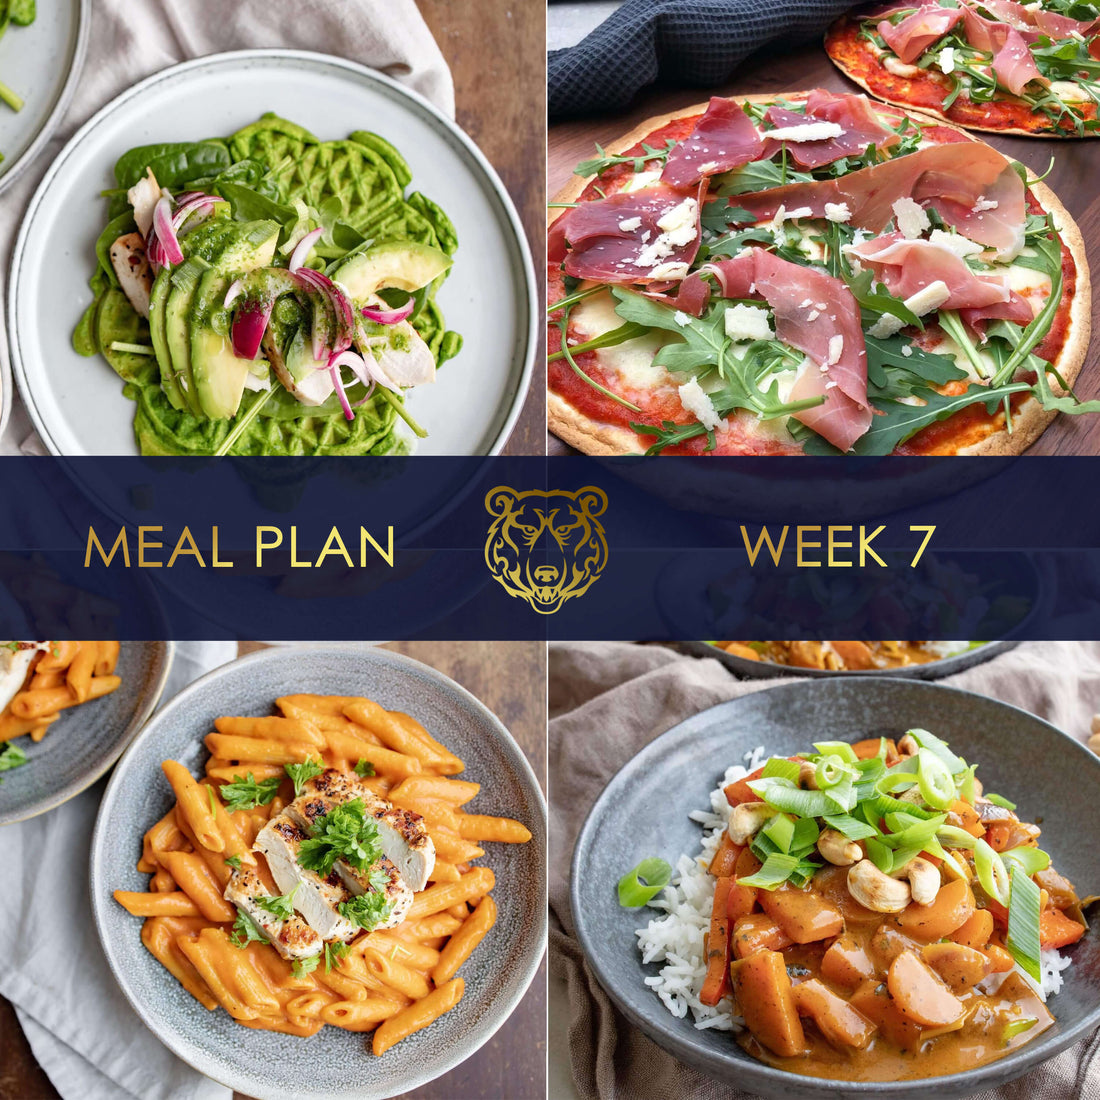 Save time and money with a meal plan and grocery list help